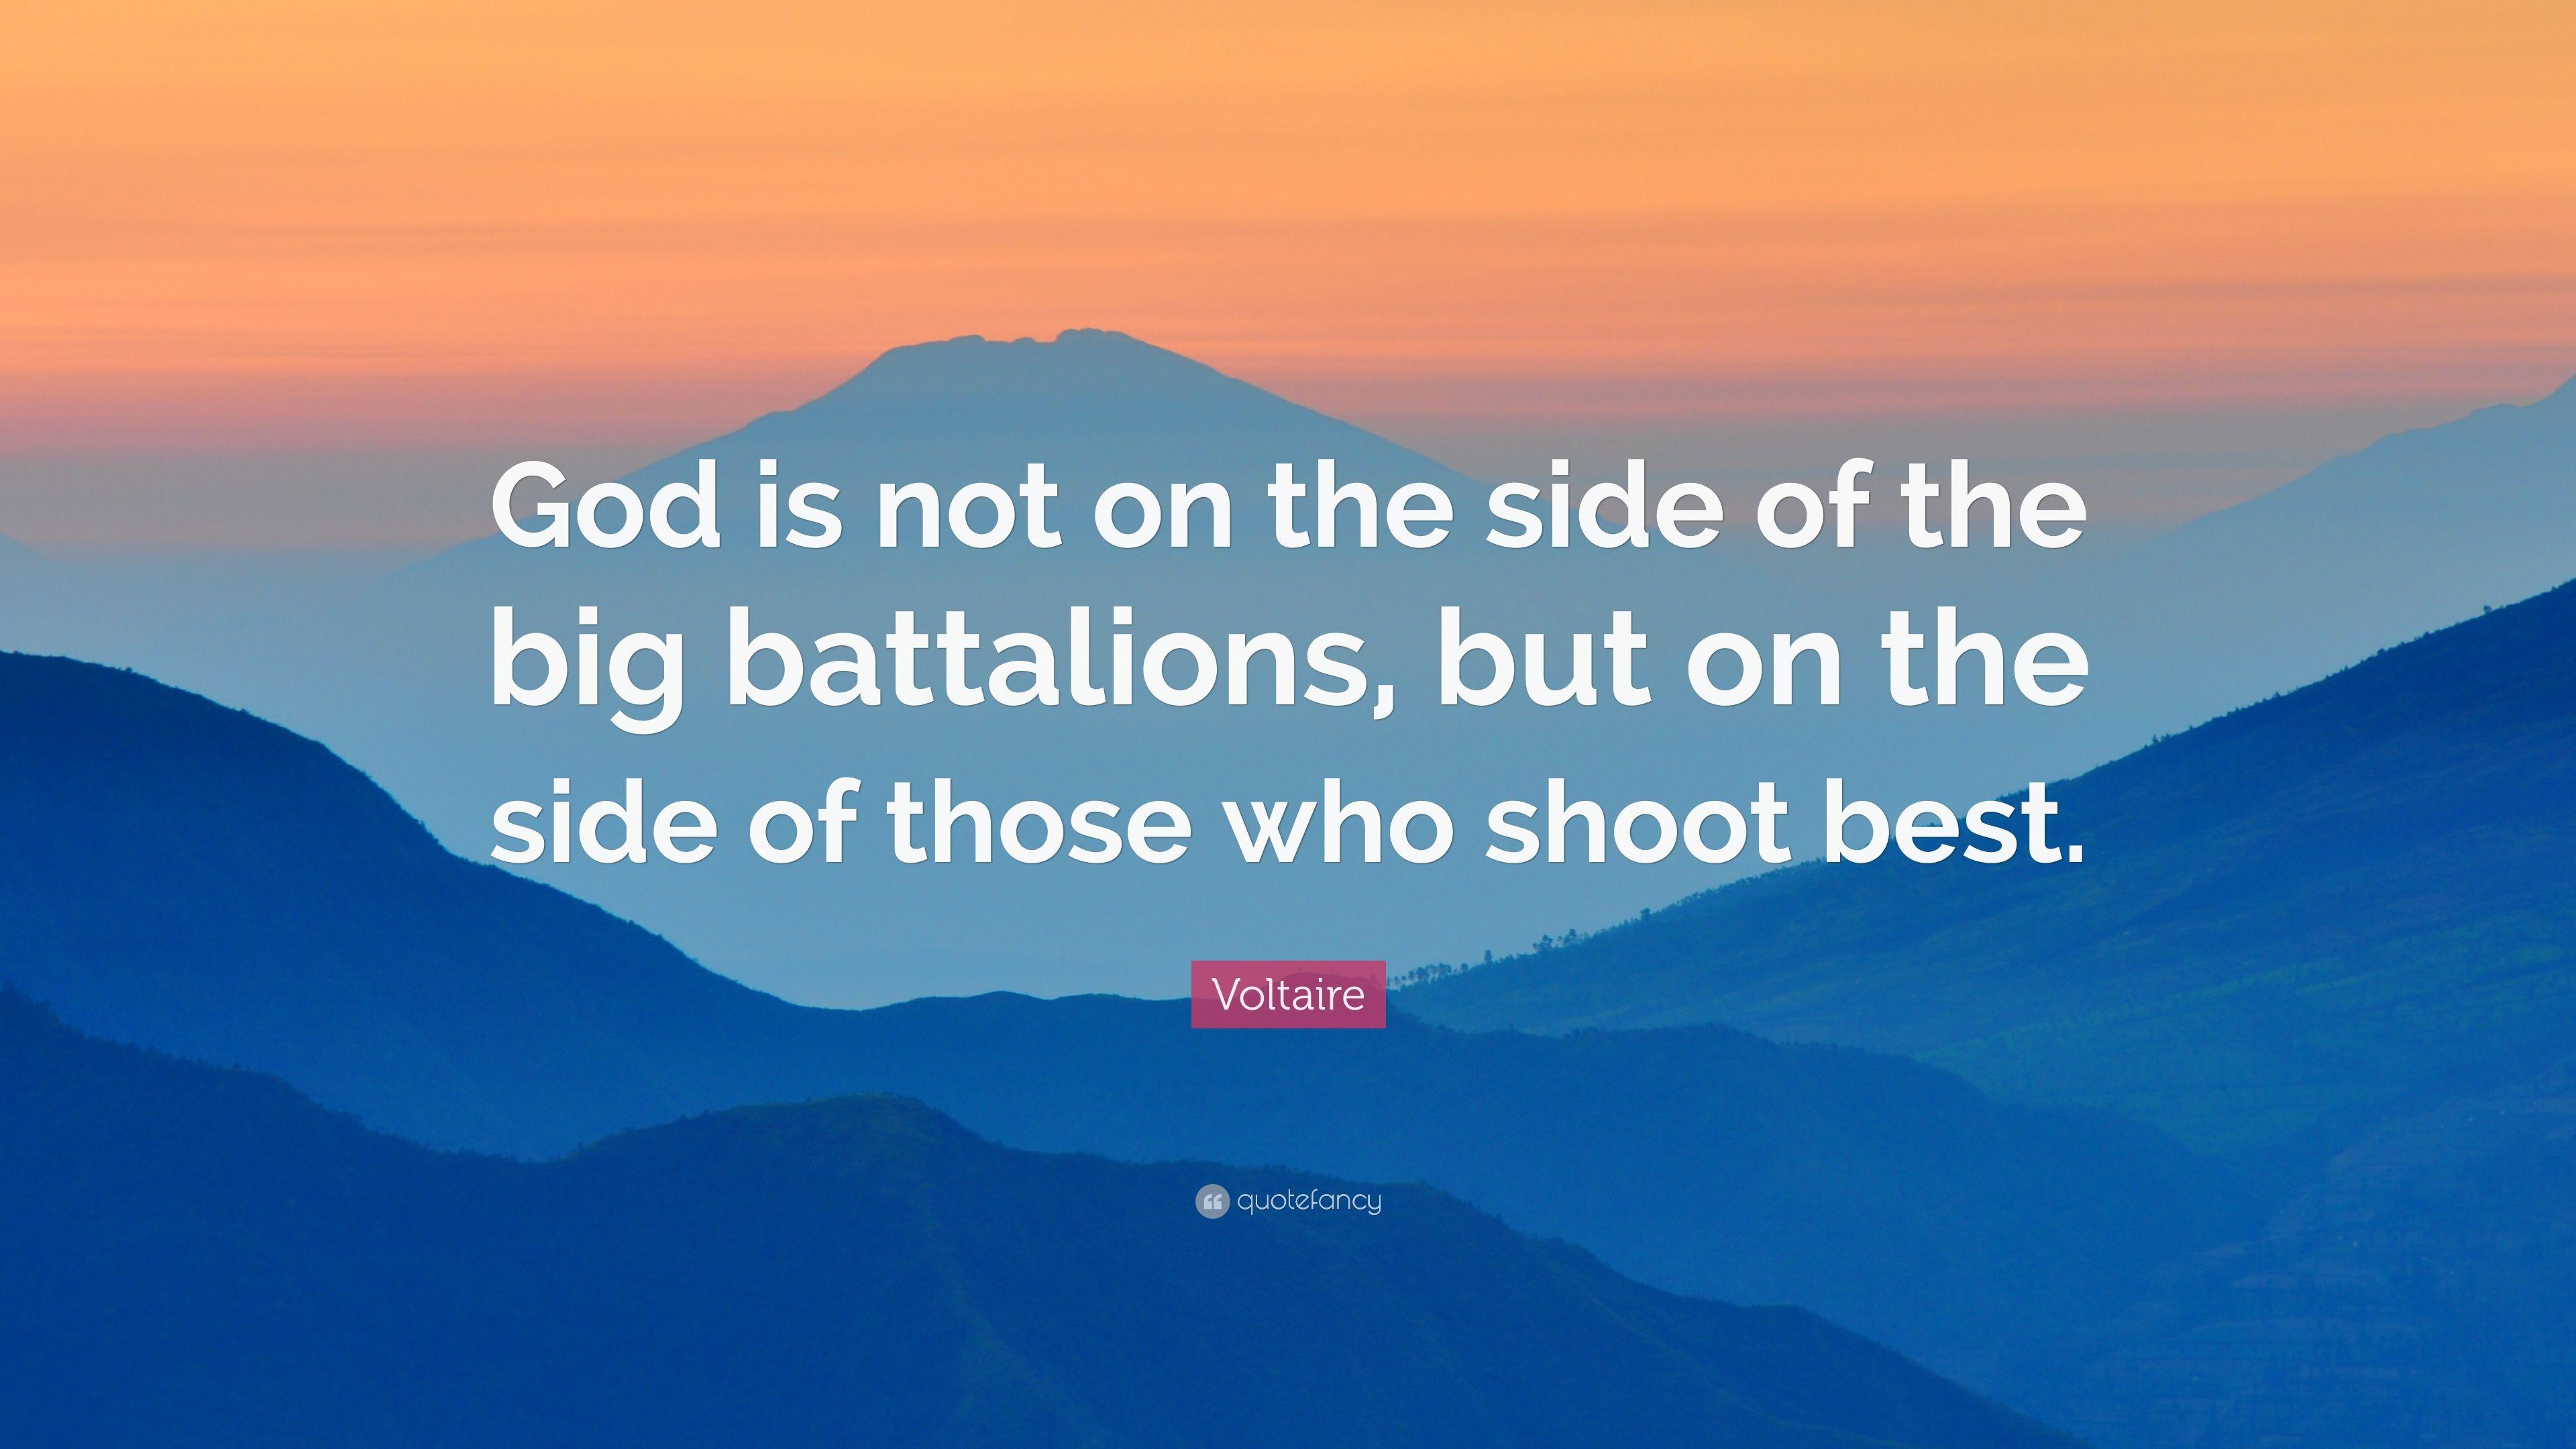 Voltaire Quote: “God is not on the side of the big battalions, but